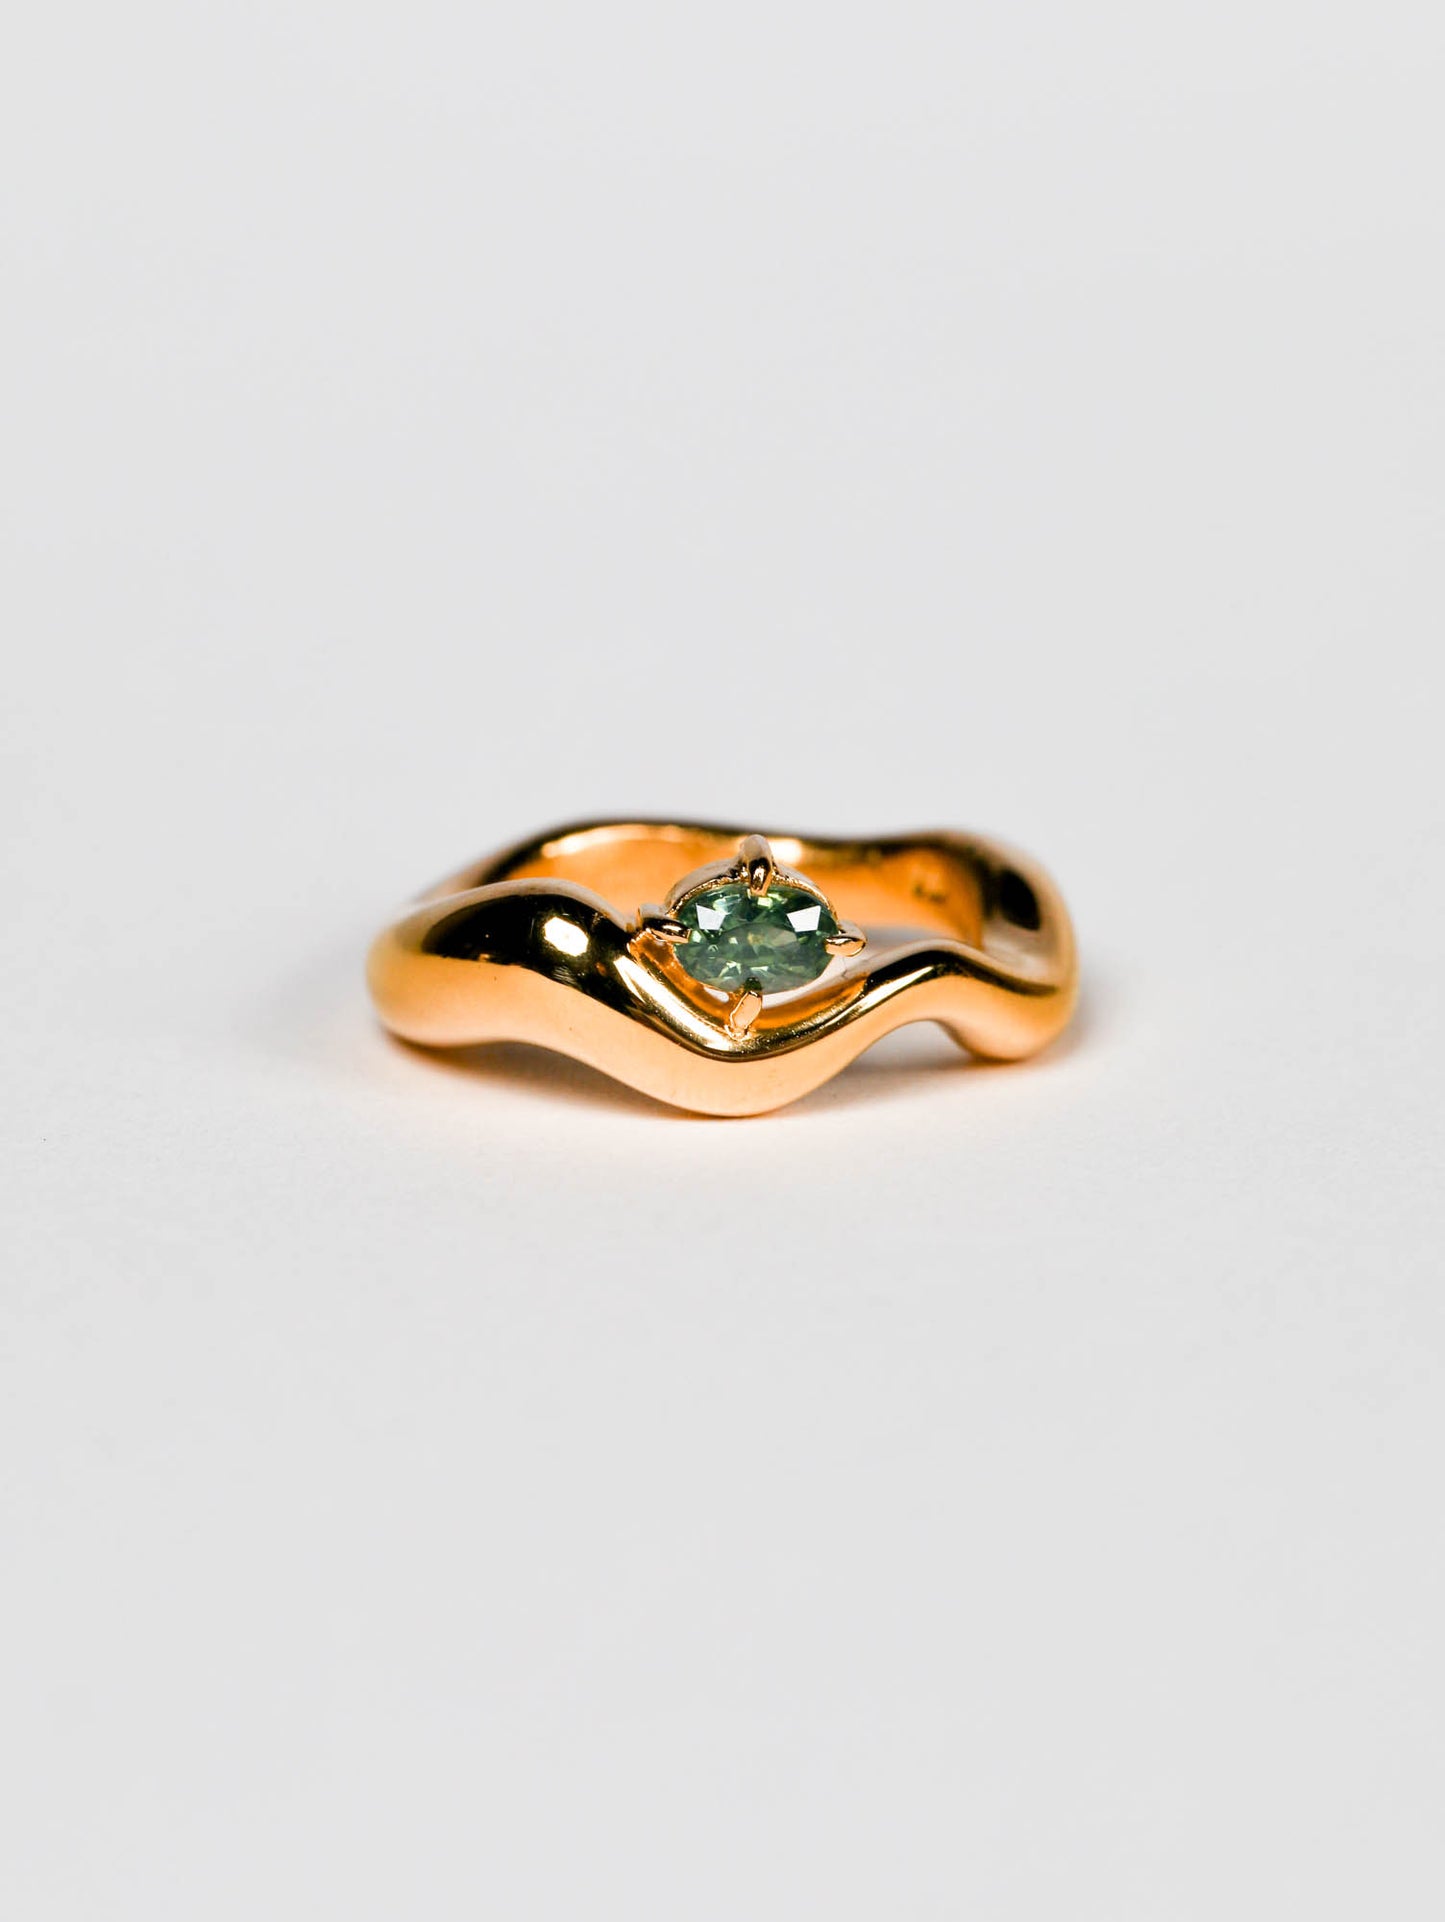 Wave Ring Gold with single Tourmaline Stone # 6 | Size 6.5